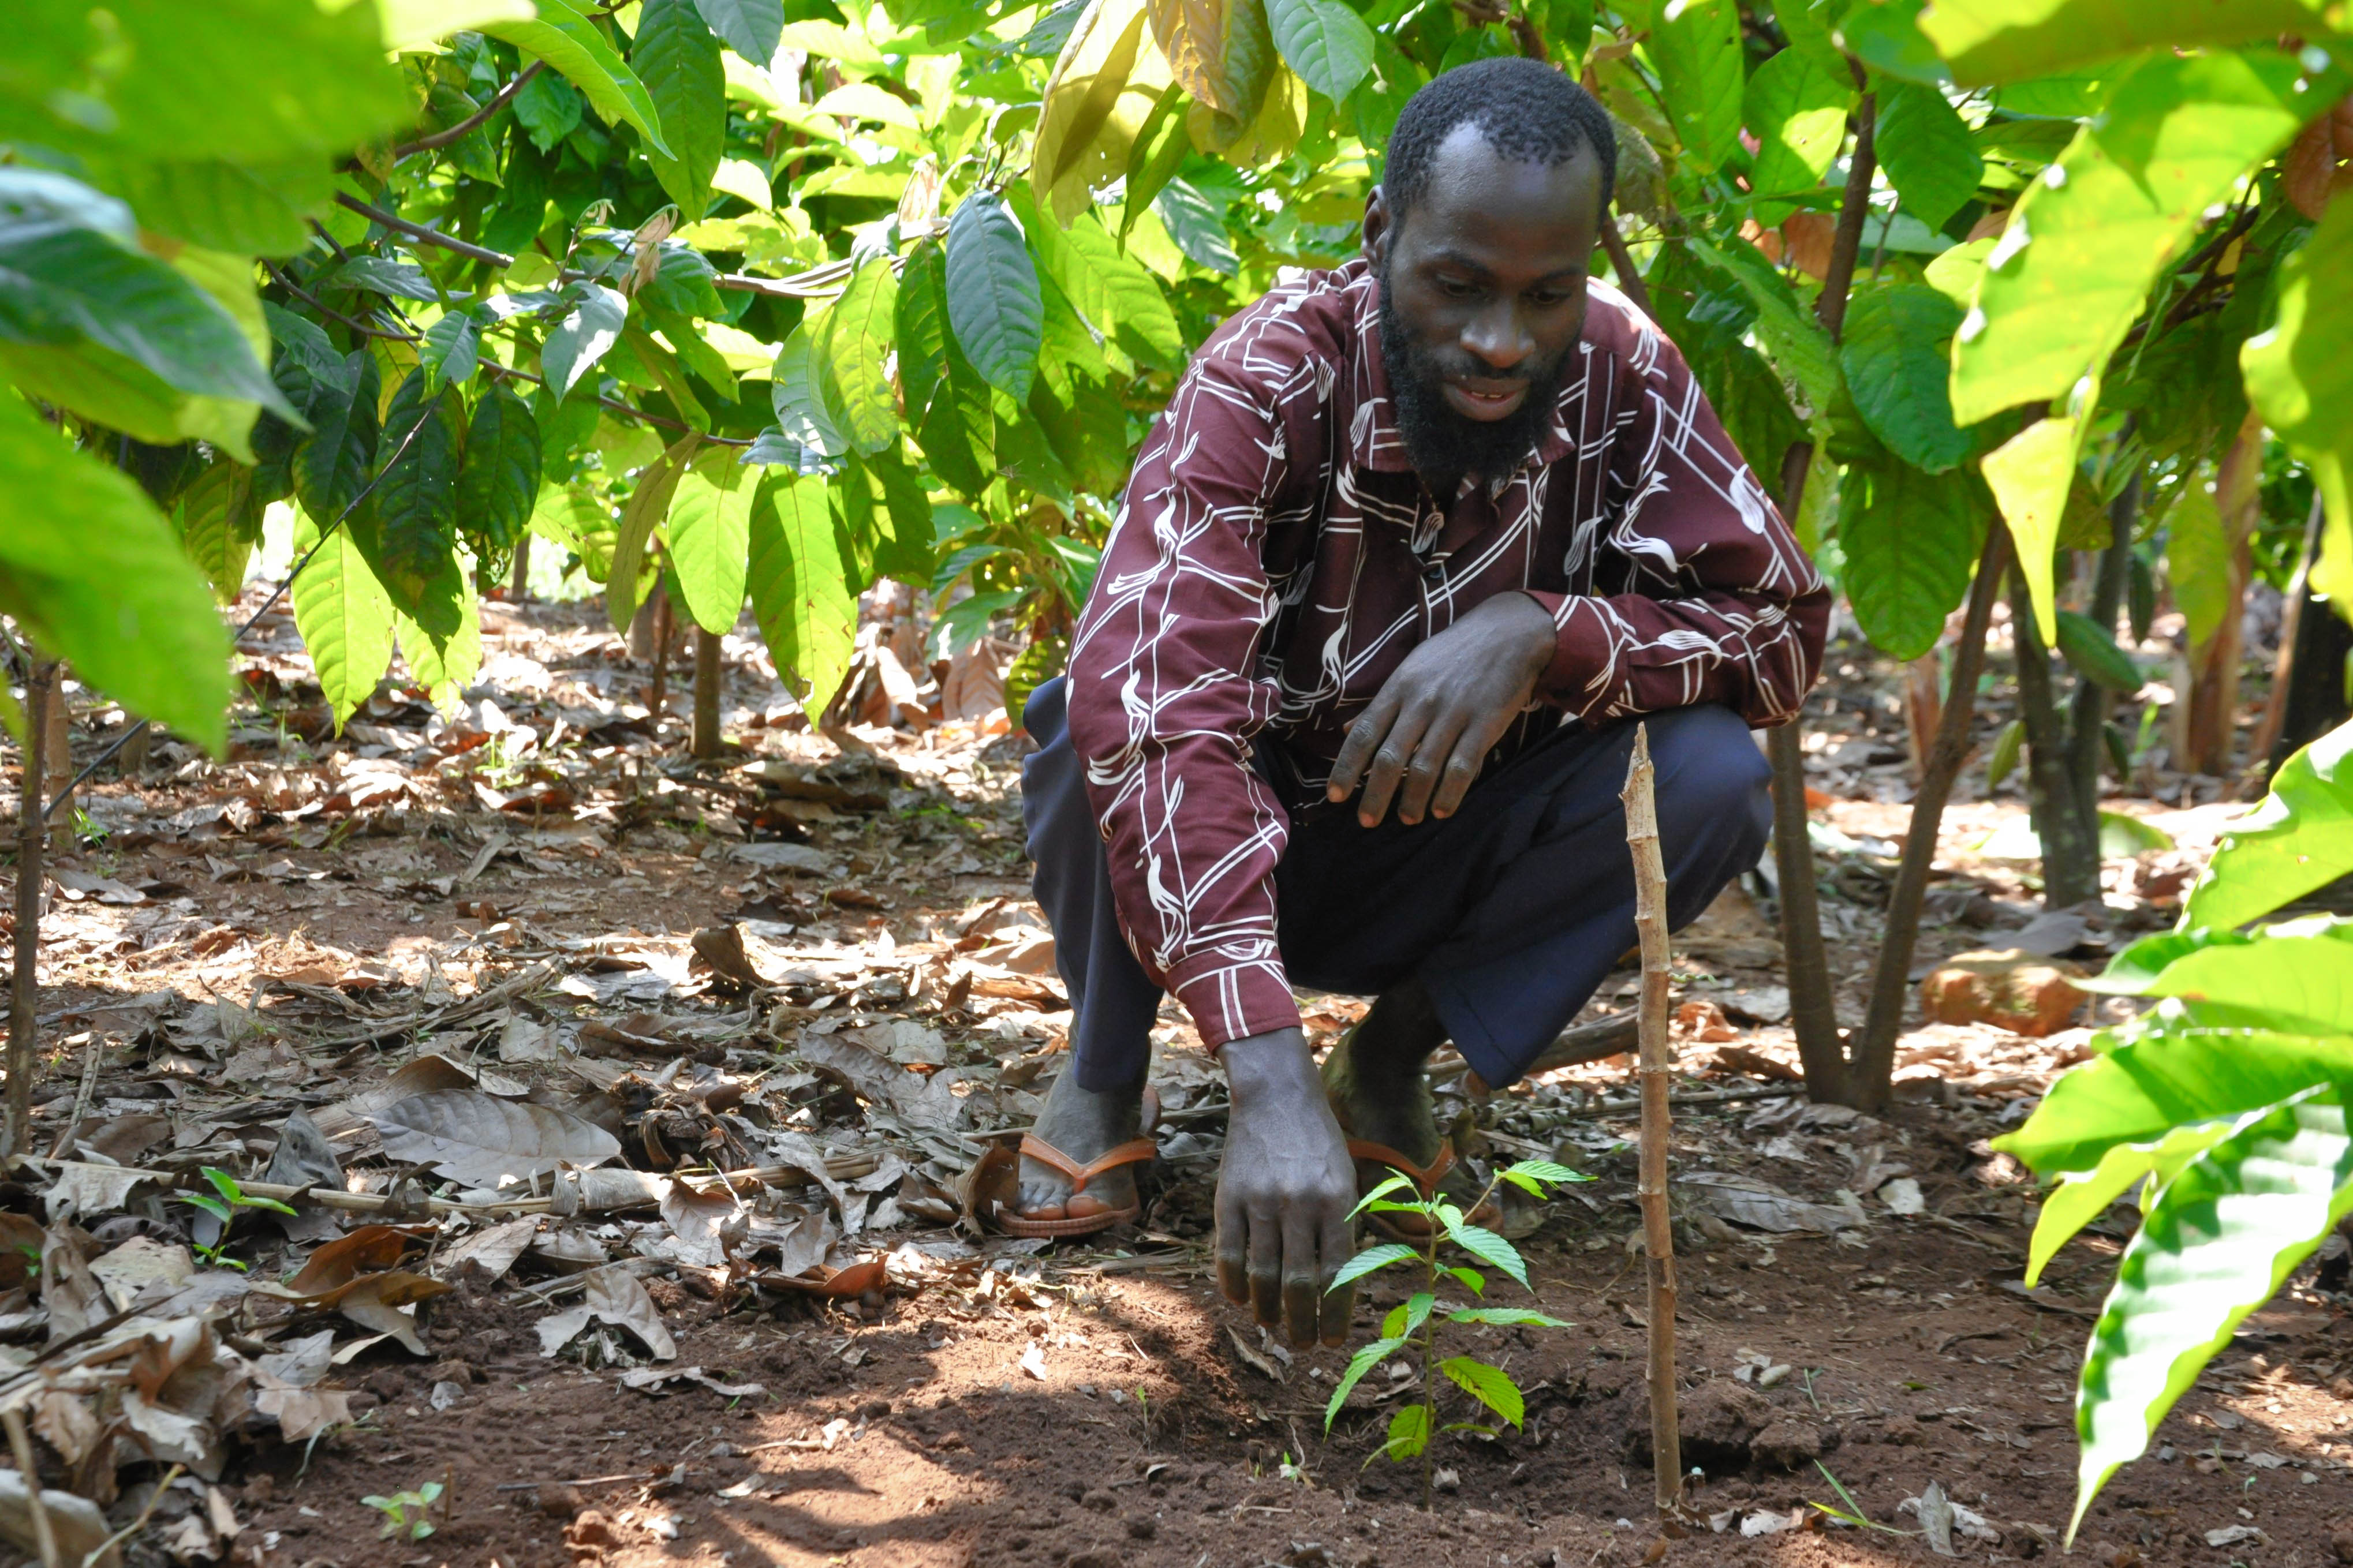 Mr. Byaruhanga carrying out agro-forestry on his land in Birungu parish